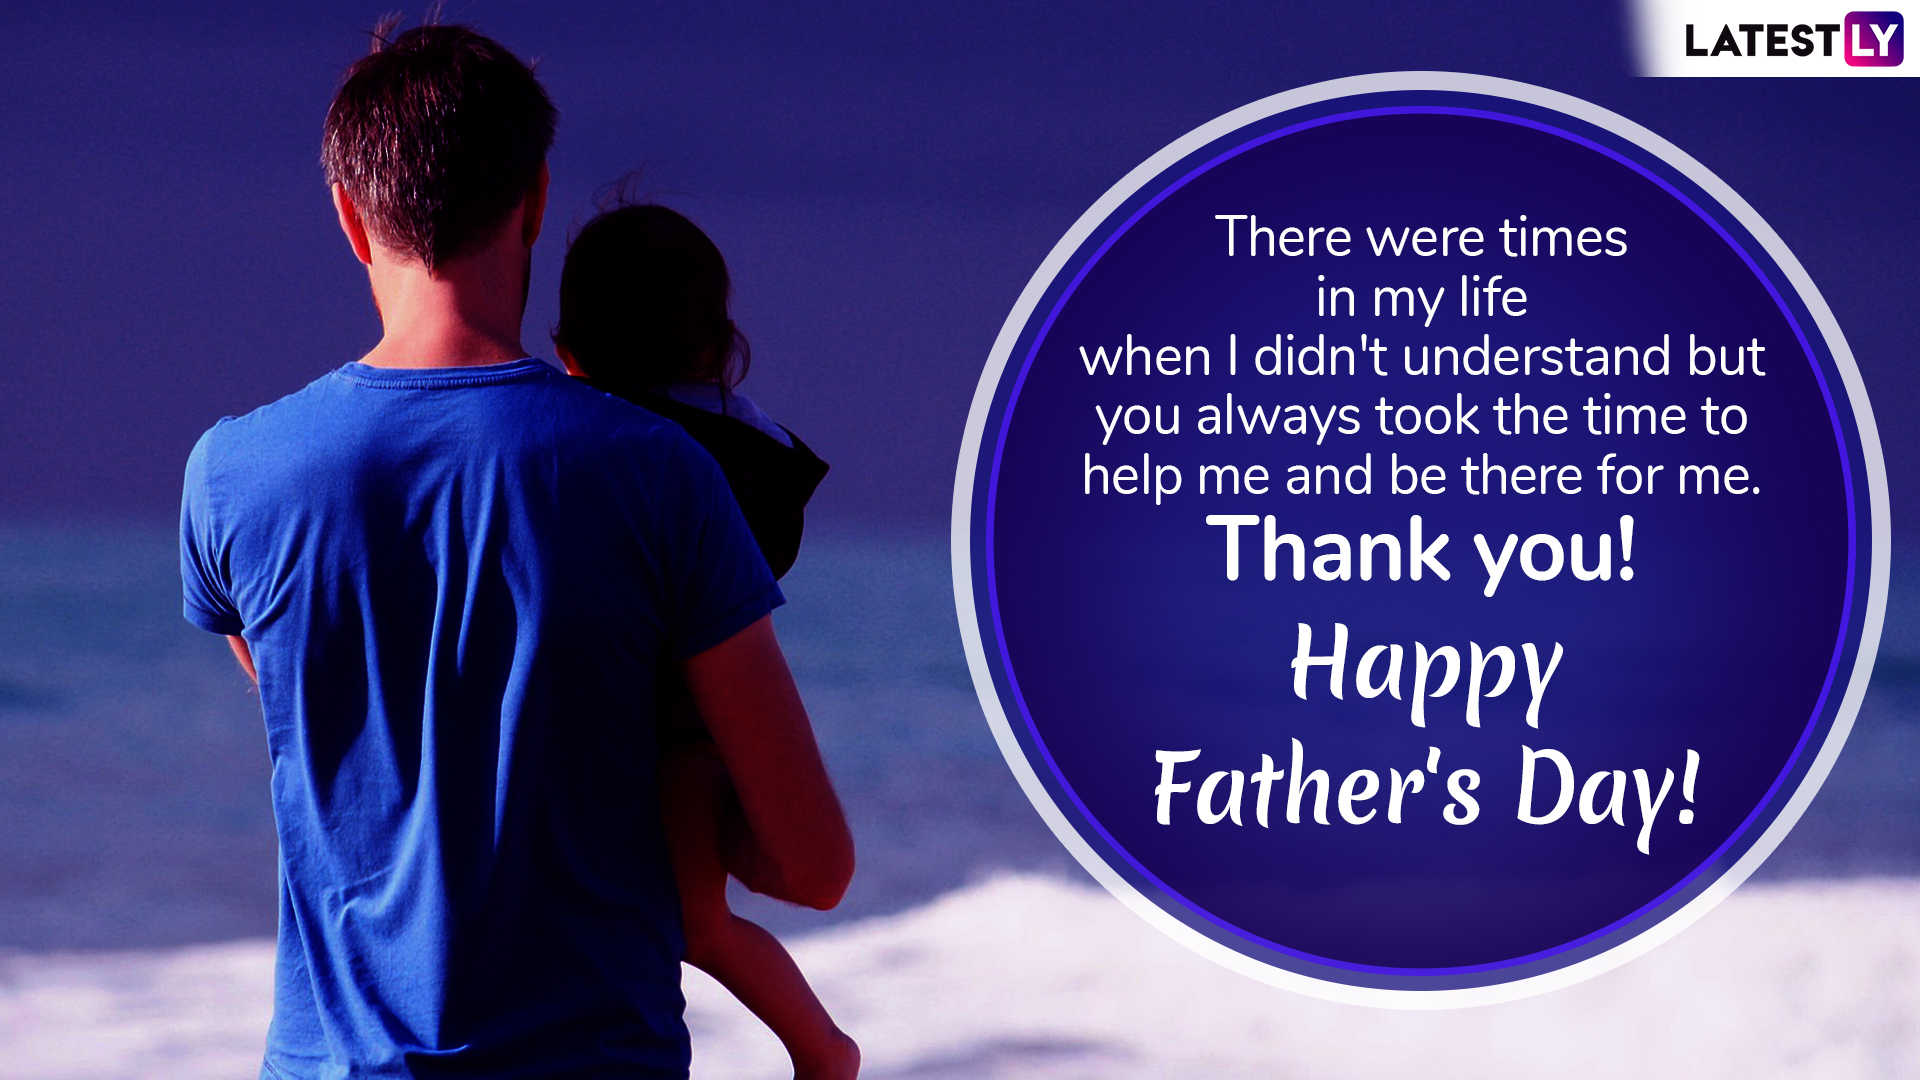 Father's Day 2019 Messages: WhatsApp Stickers, Dad Quotes ...